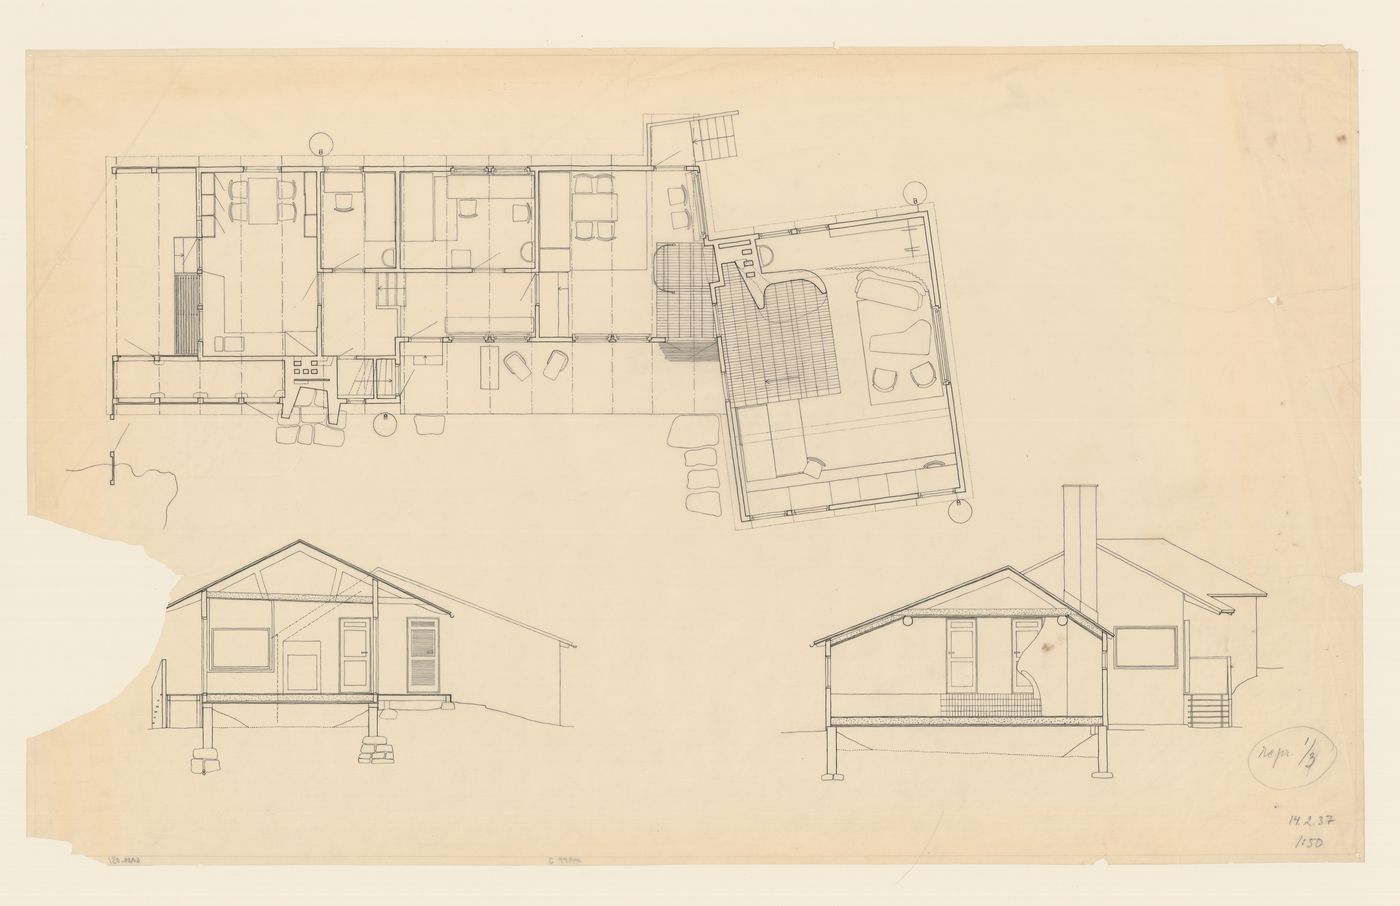 Plan, cross section and sectional elevation for Stennäs, Sorunda, Sweden